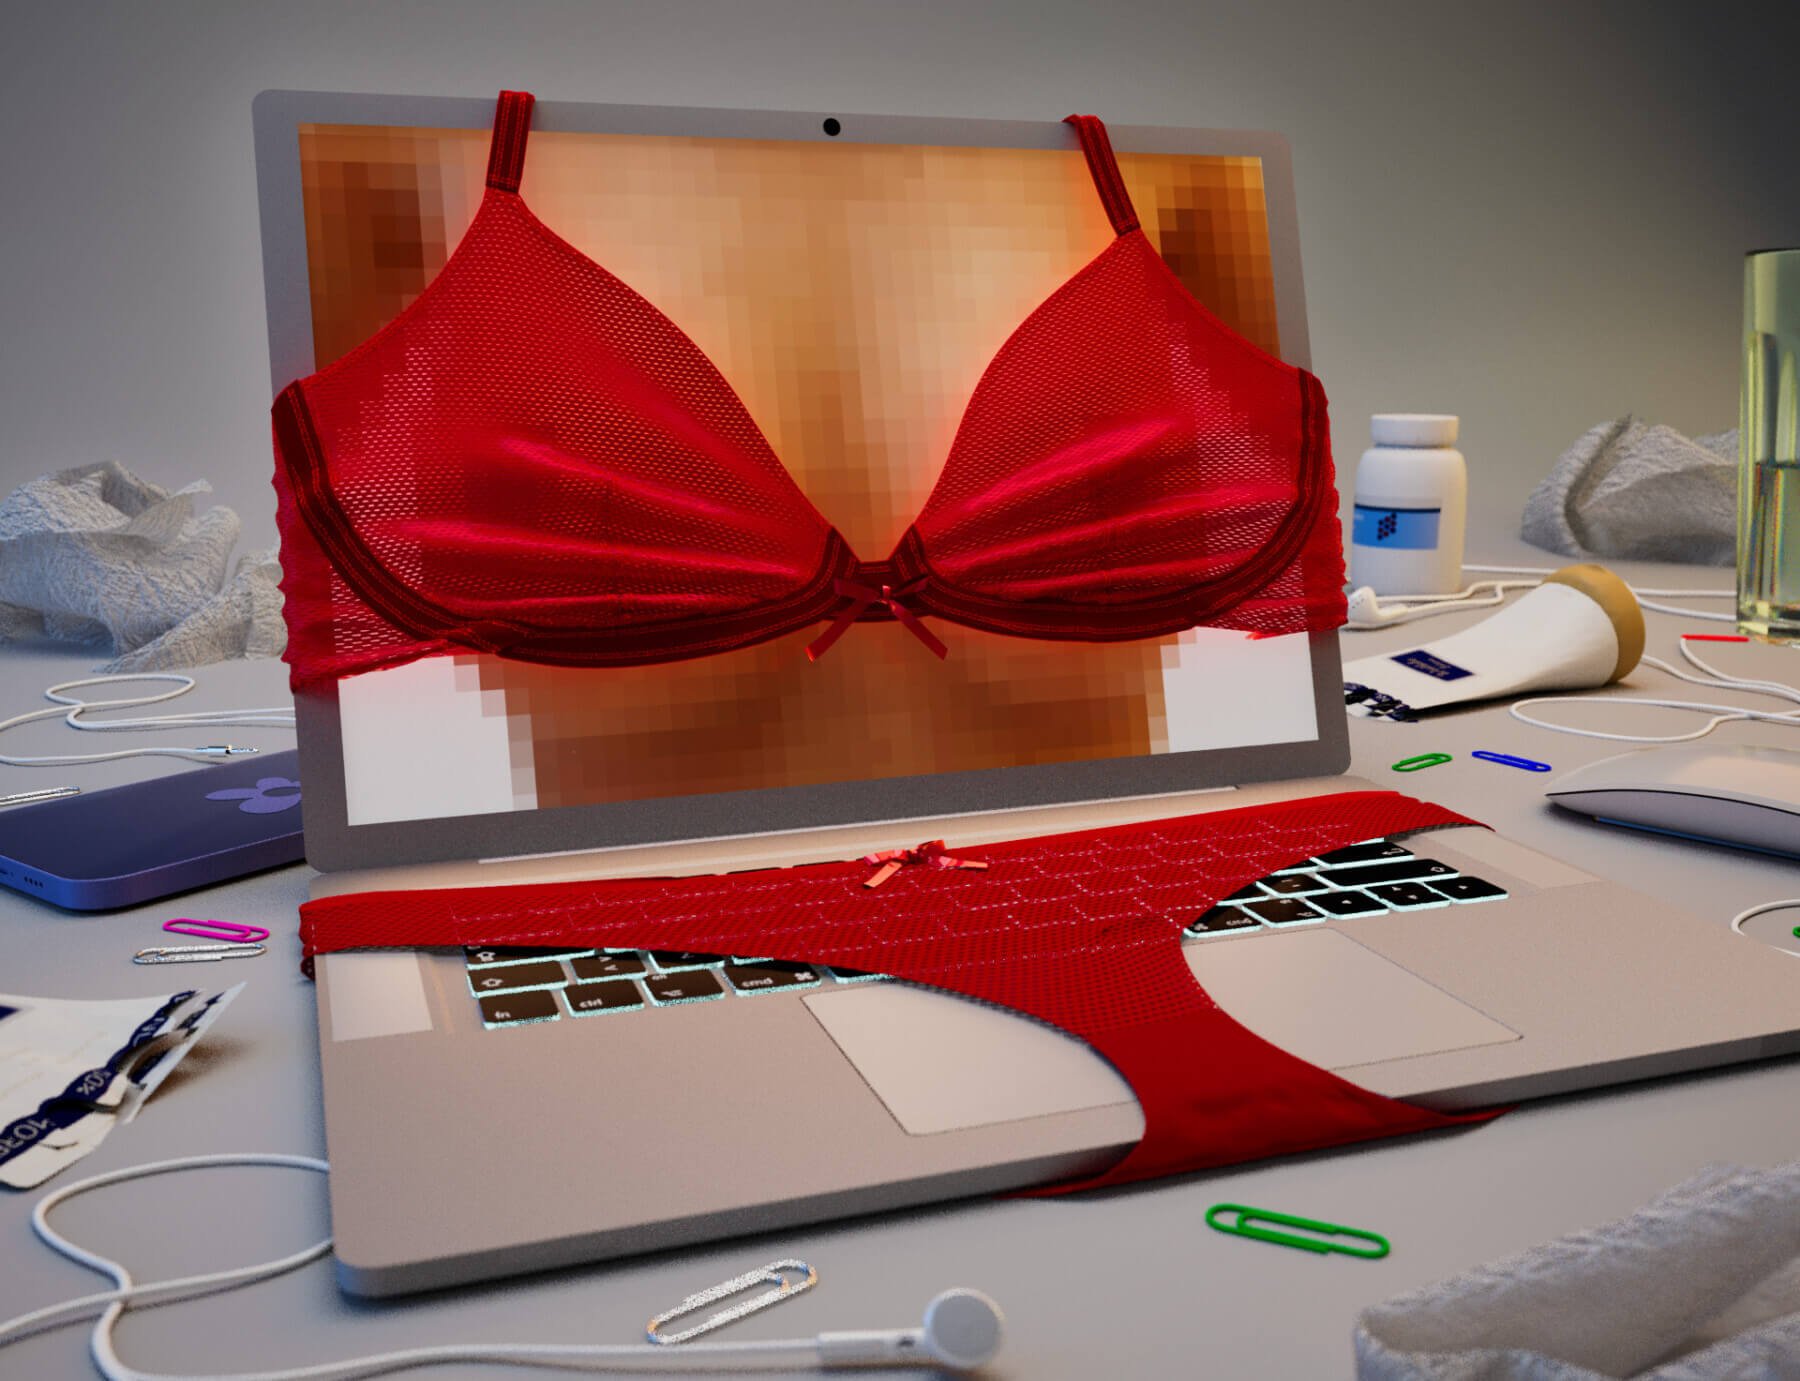 A bra is strapped over a laptop screen showing a pixellated pair of breasts.